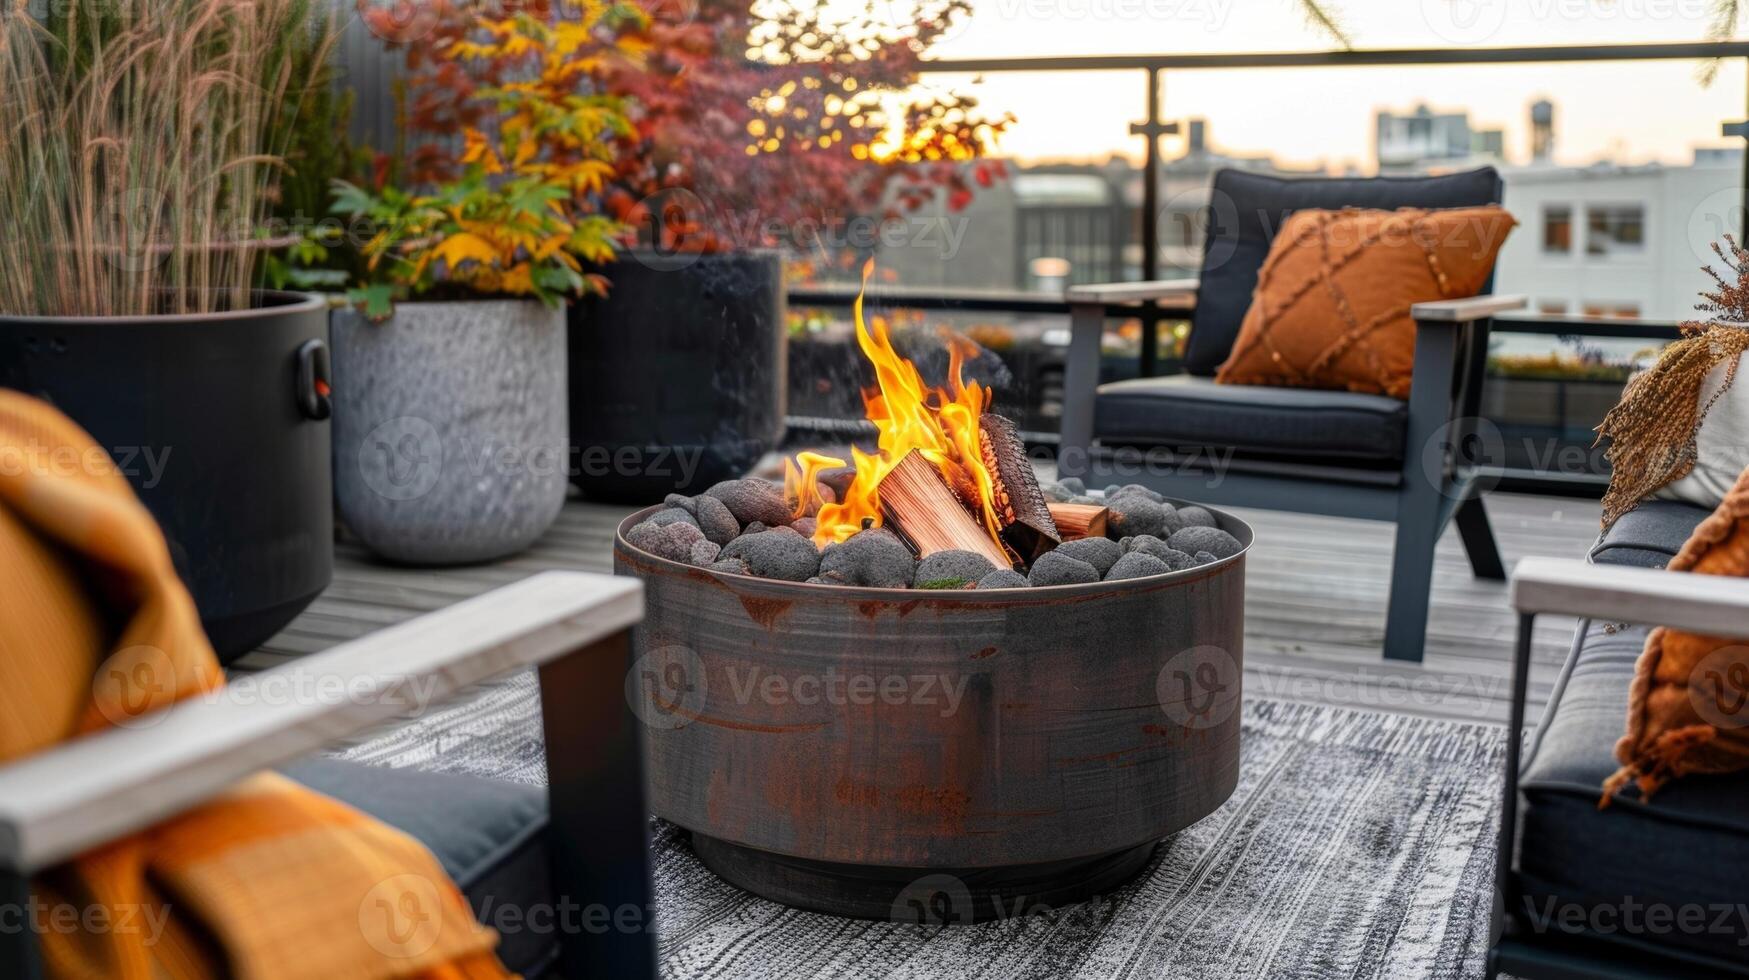 The scent of wood smoke from the fire pit adds to the rustic charm of the rooftop making it a charming escape from the hustle and bustle of the city. 2d flat cartoon photo